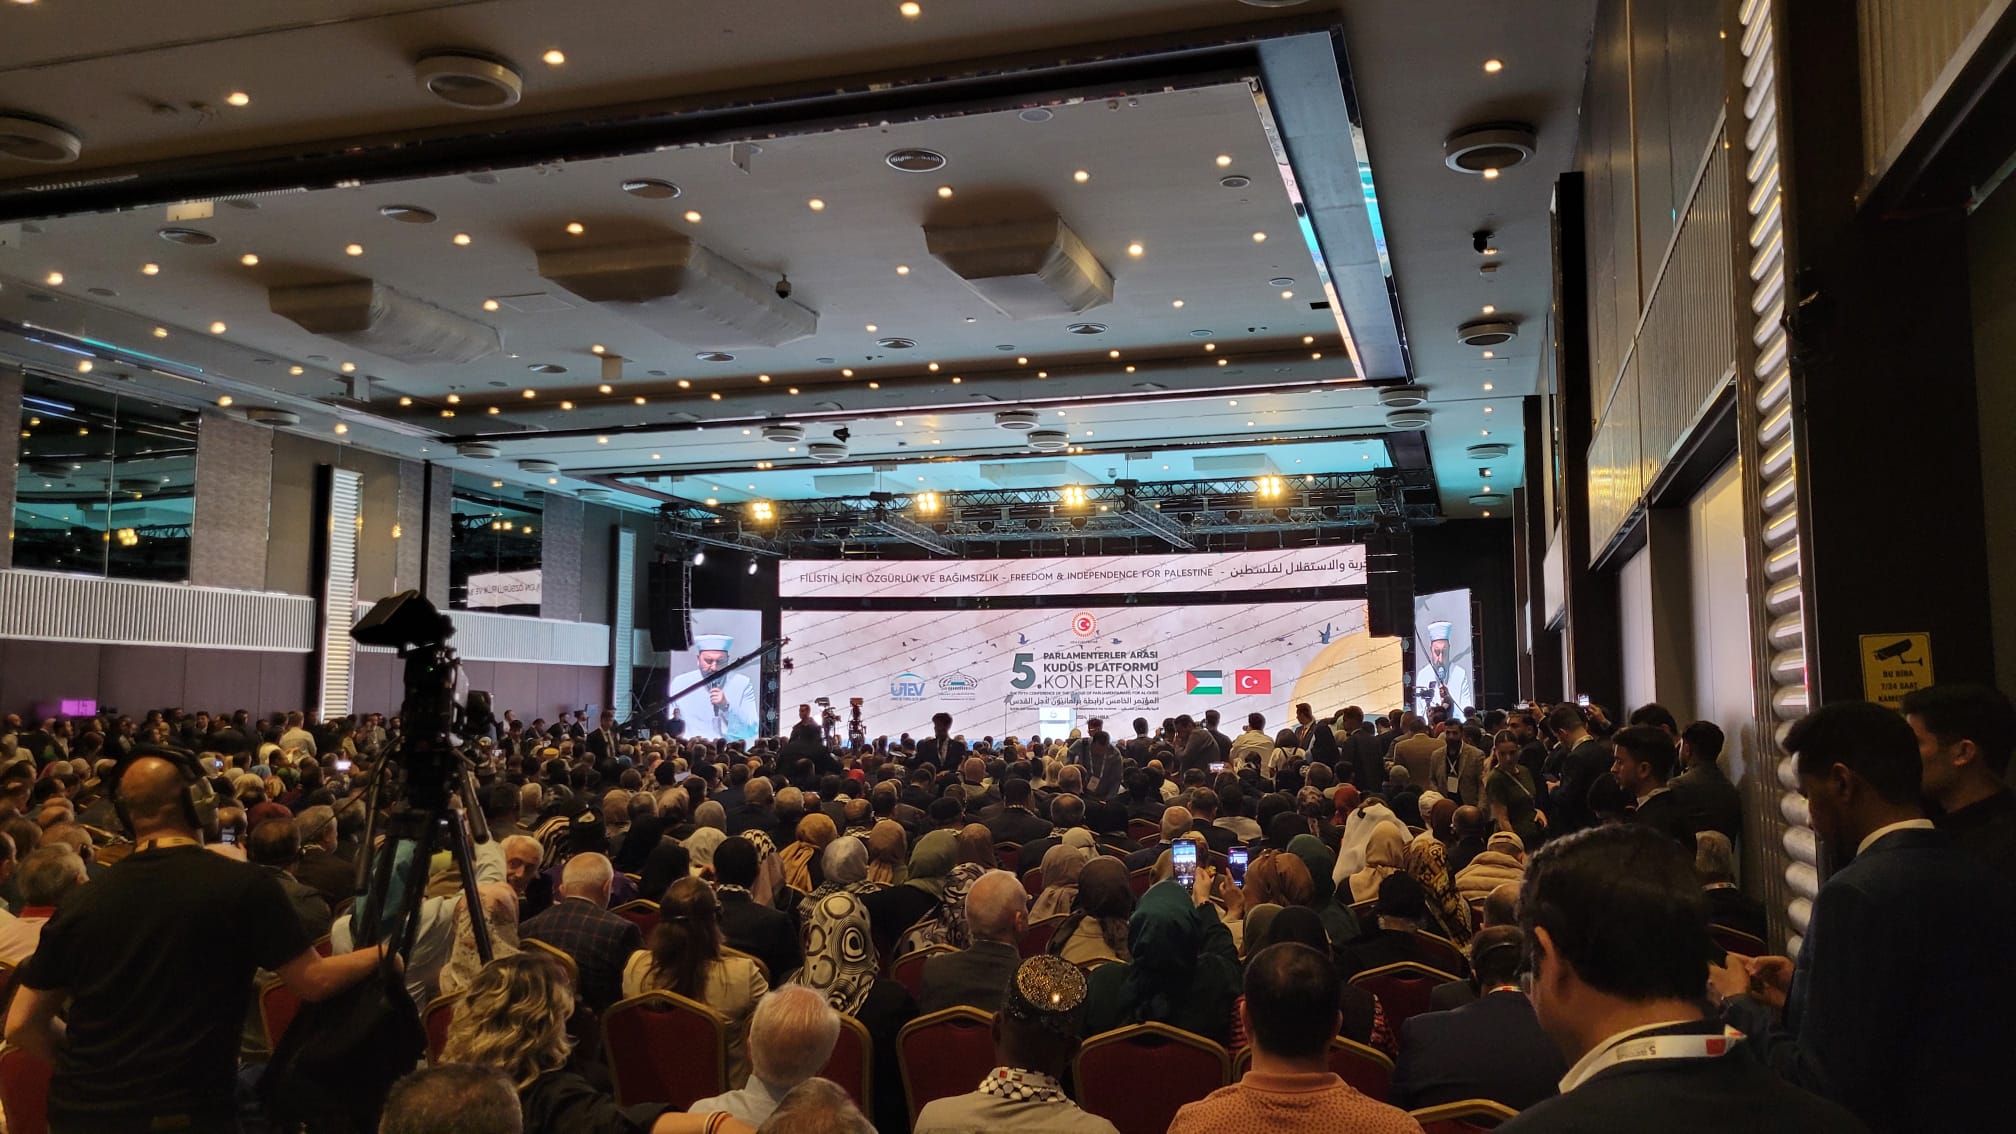 Parliamentarians for Al Quds'' Launches its Fifth Conference in Istanbul